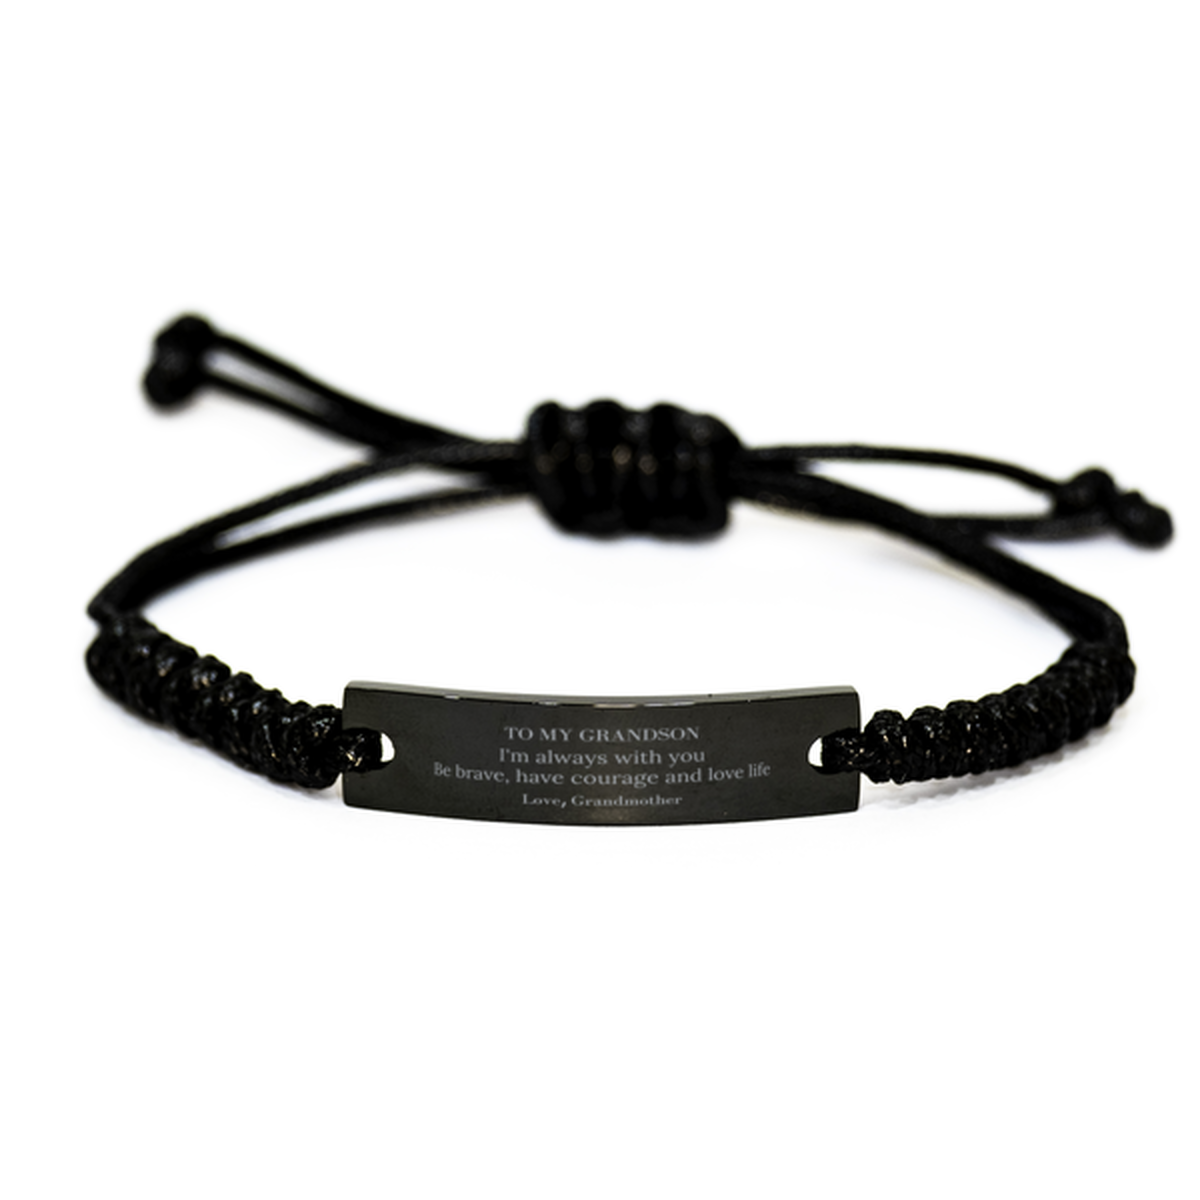 To My Grandson Gifts from Grandmother, Unique Black Rope Bracelet Inspirational Christmas Birthday Graduation Gifts for Grandson I'm always with you. Be brave, have courage and love life. Love, Grandmother